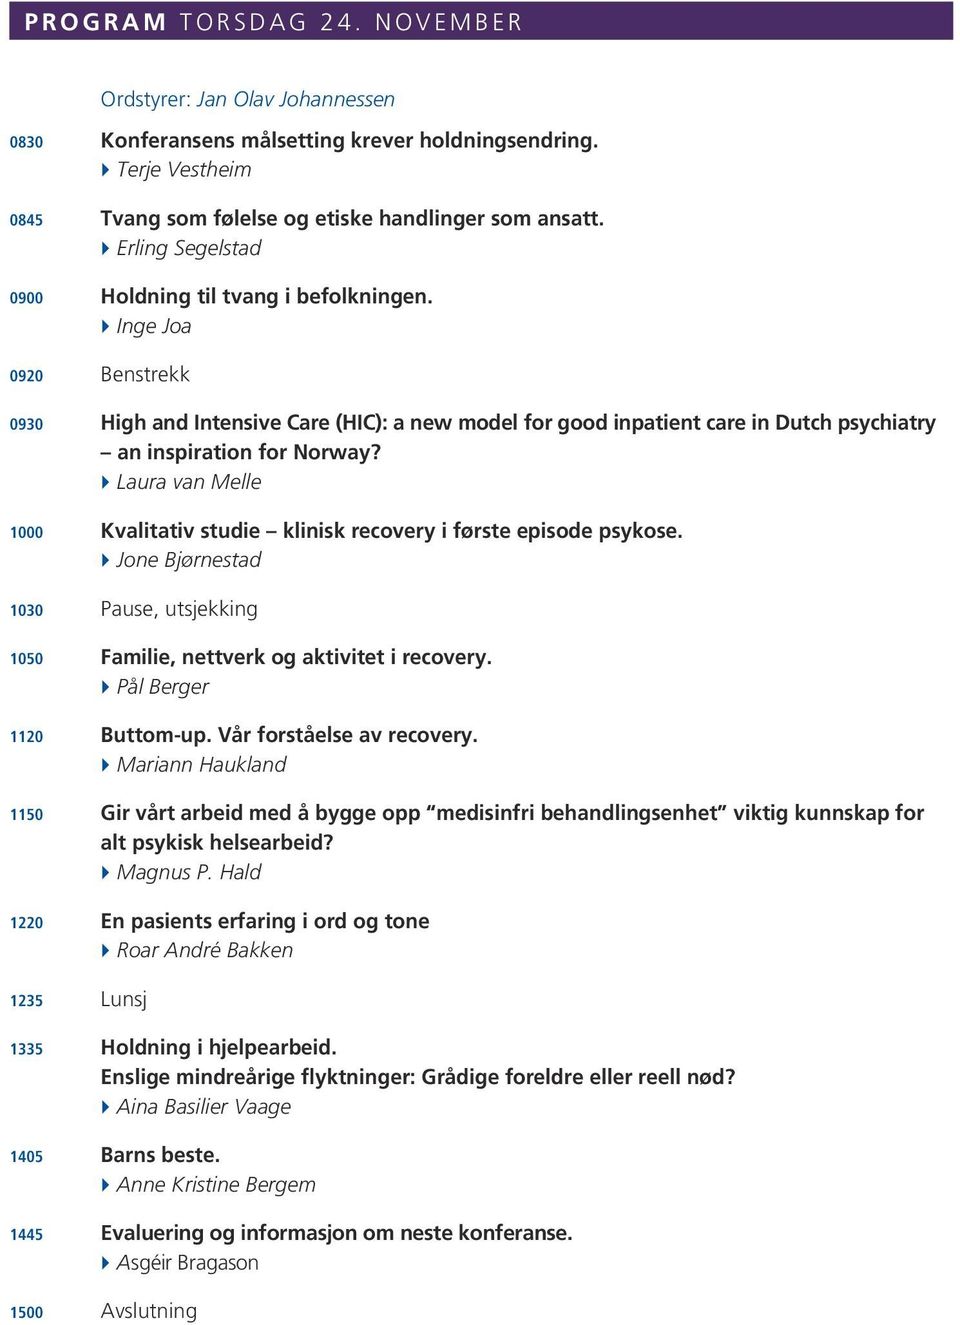 } Inge Joa 0920 Benstrekk 0930 High and Intensive Care (HIC): a new model for good inpatient care in Dutch psychiatry an inspiration for Norway?